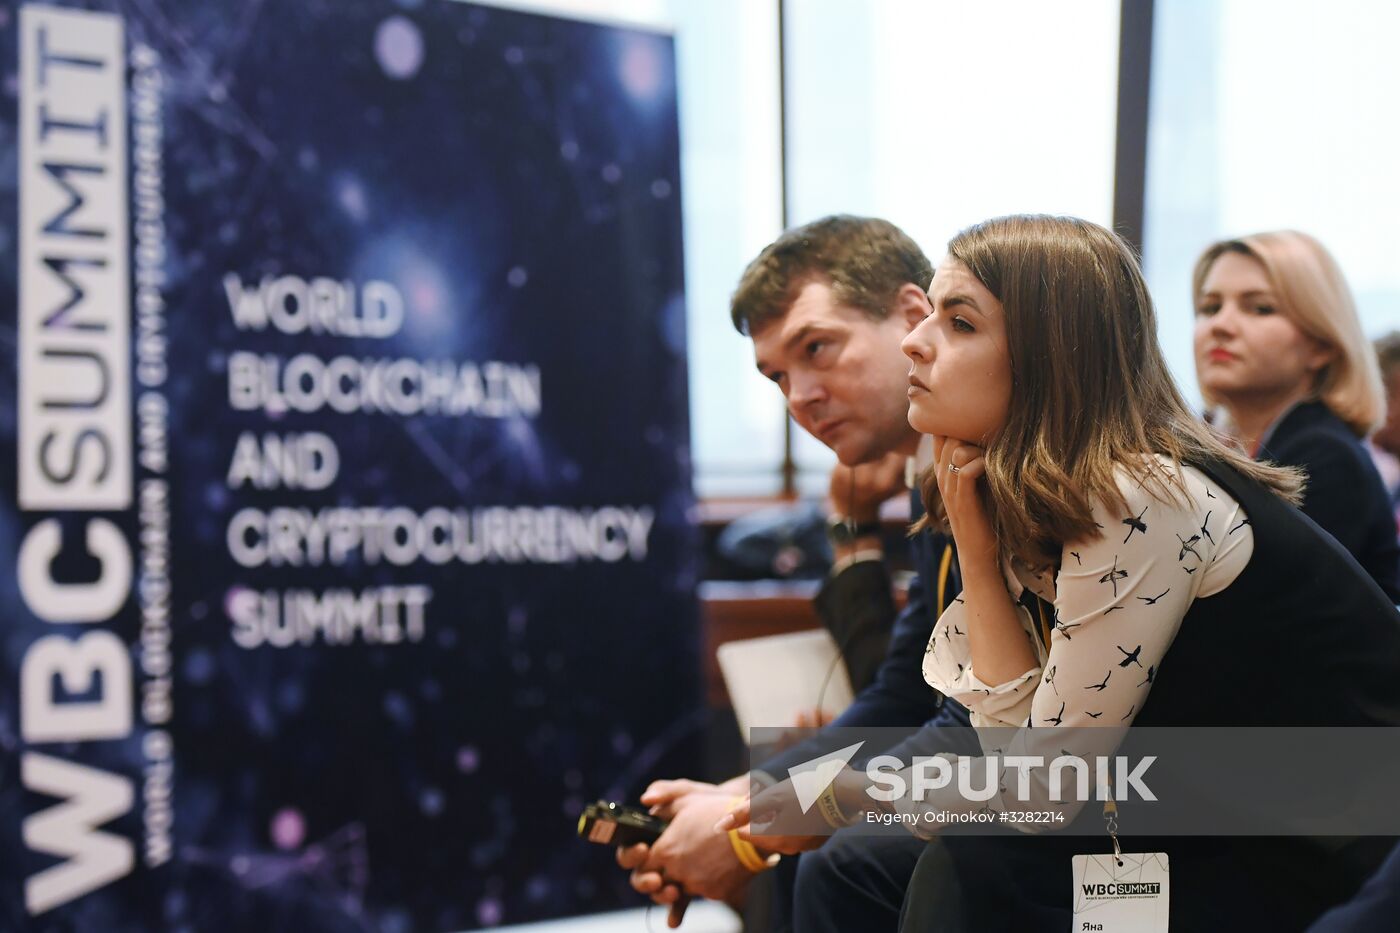 World Blockchain and Cryptocurrency Summit